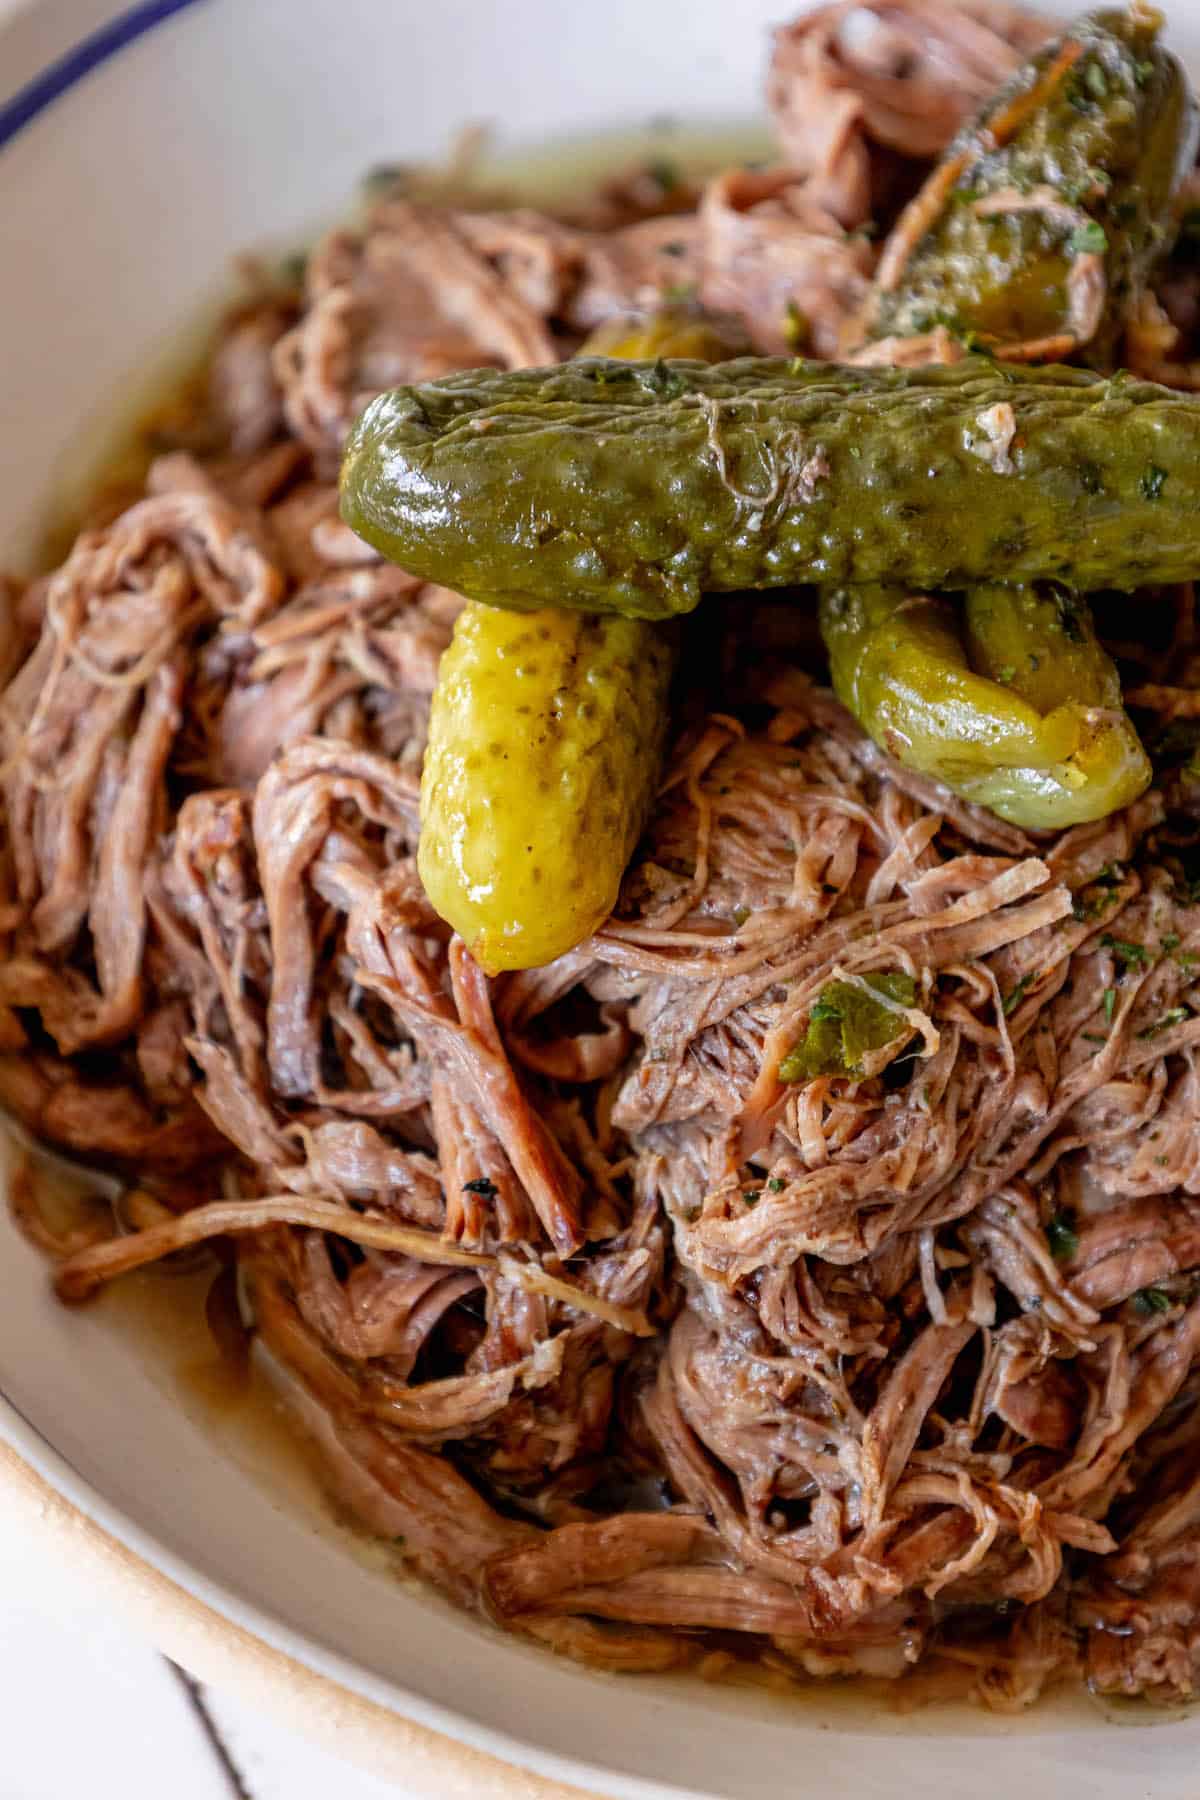 A bowl of pulled pork and pickles on a table.